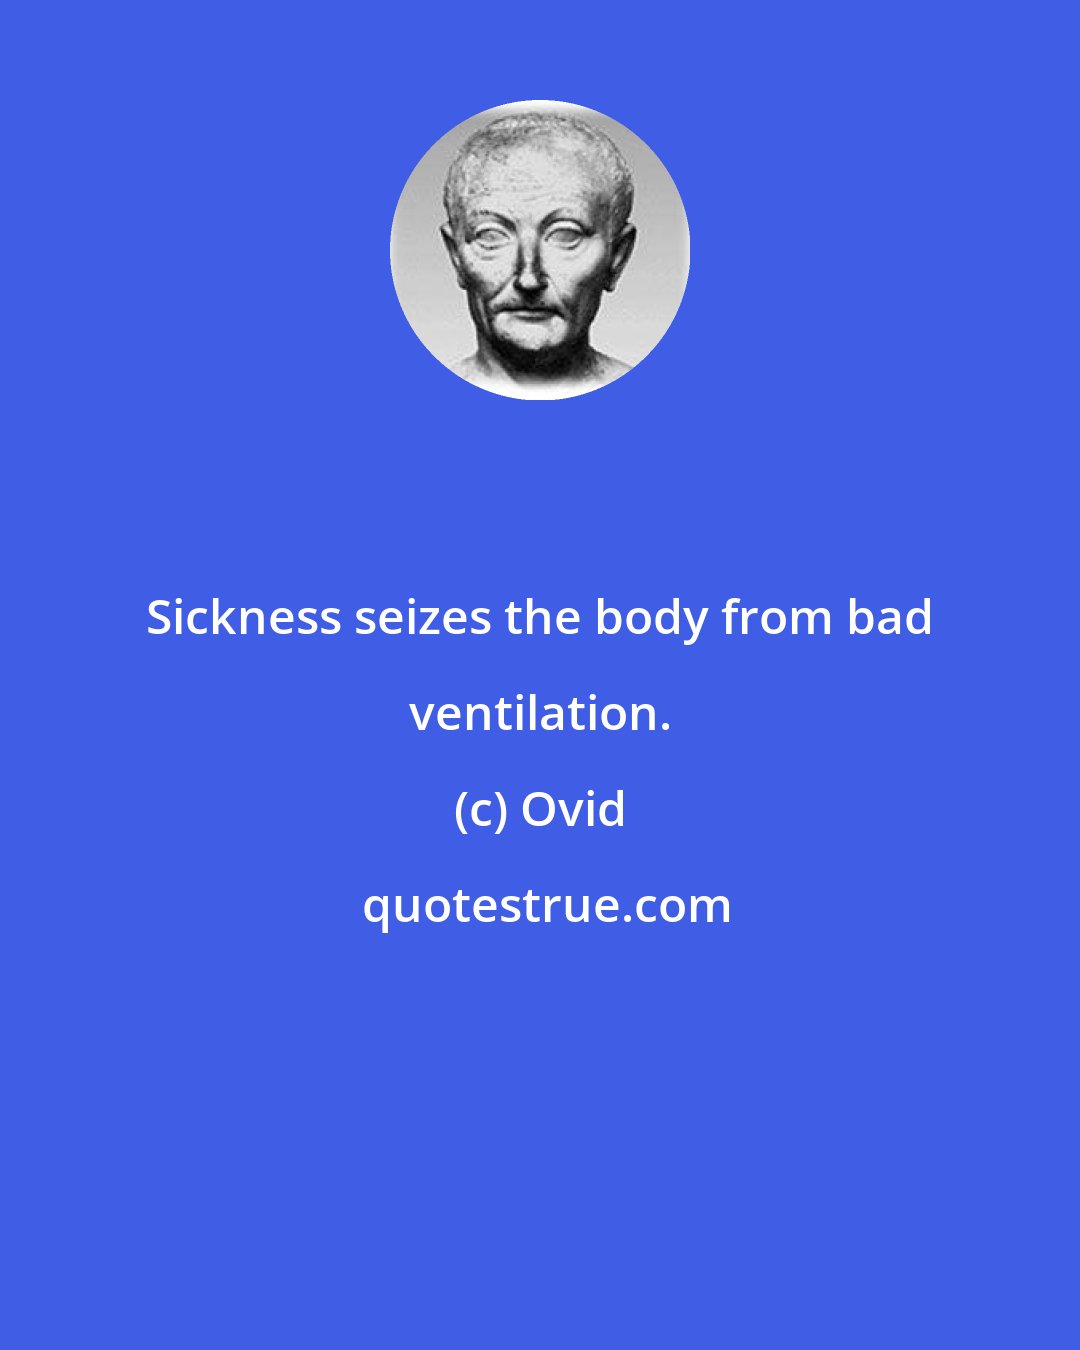 Ovid: Sickness seizes the body from bad ventilation.